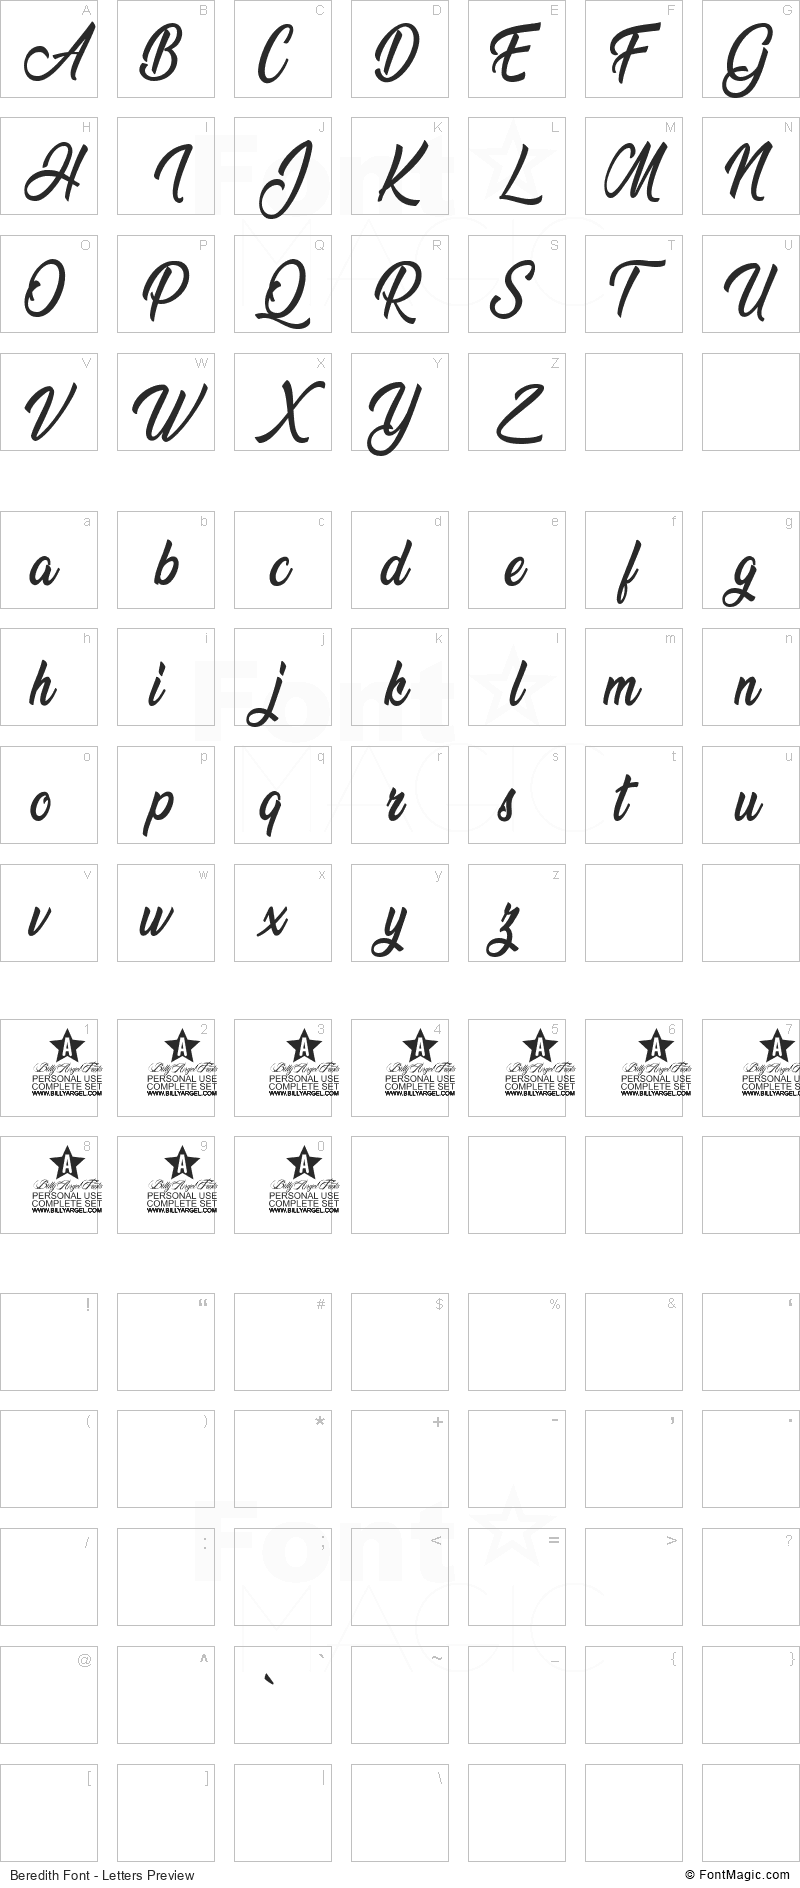 Beredith Font - All Latters Preview Chart